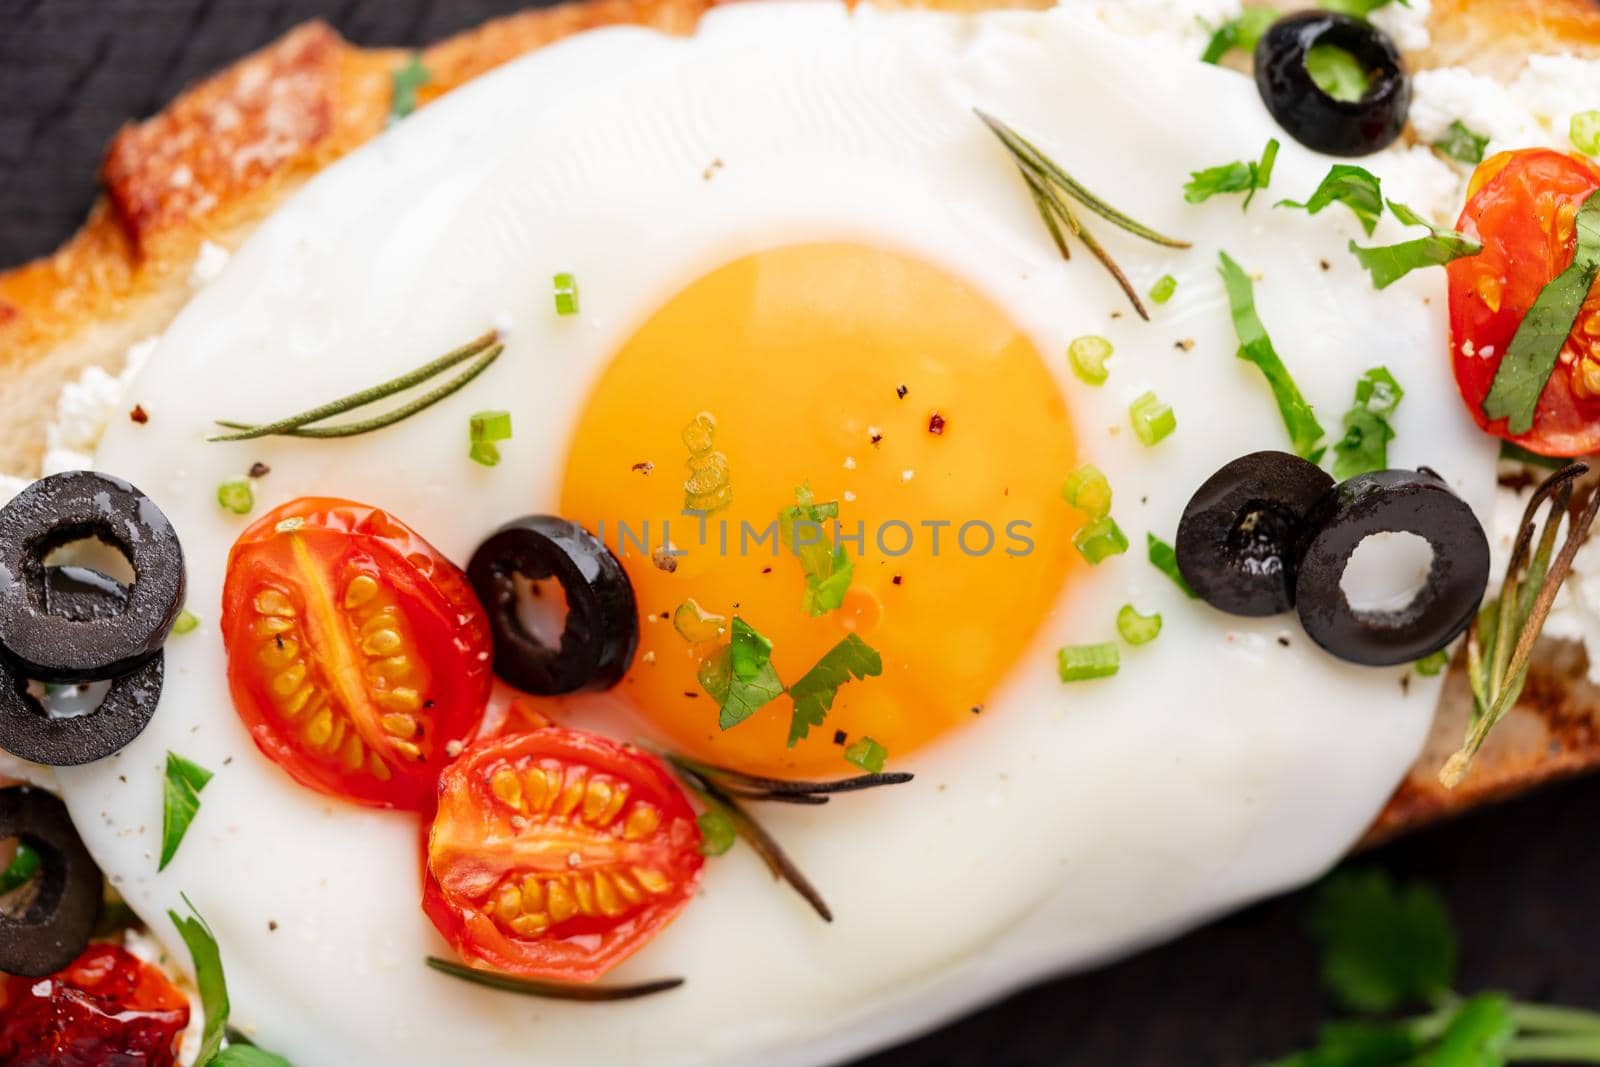 Toasted bread toast with fried eggs with yellow yolk and tomatoes, olives, sprinkled with herbs on dark wooden serving board on blue denim napkin, top view, macro, close up